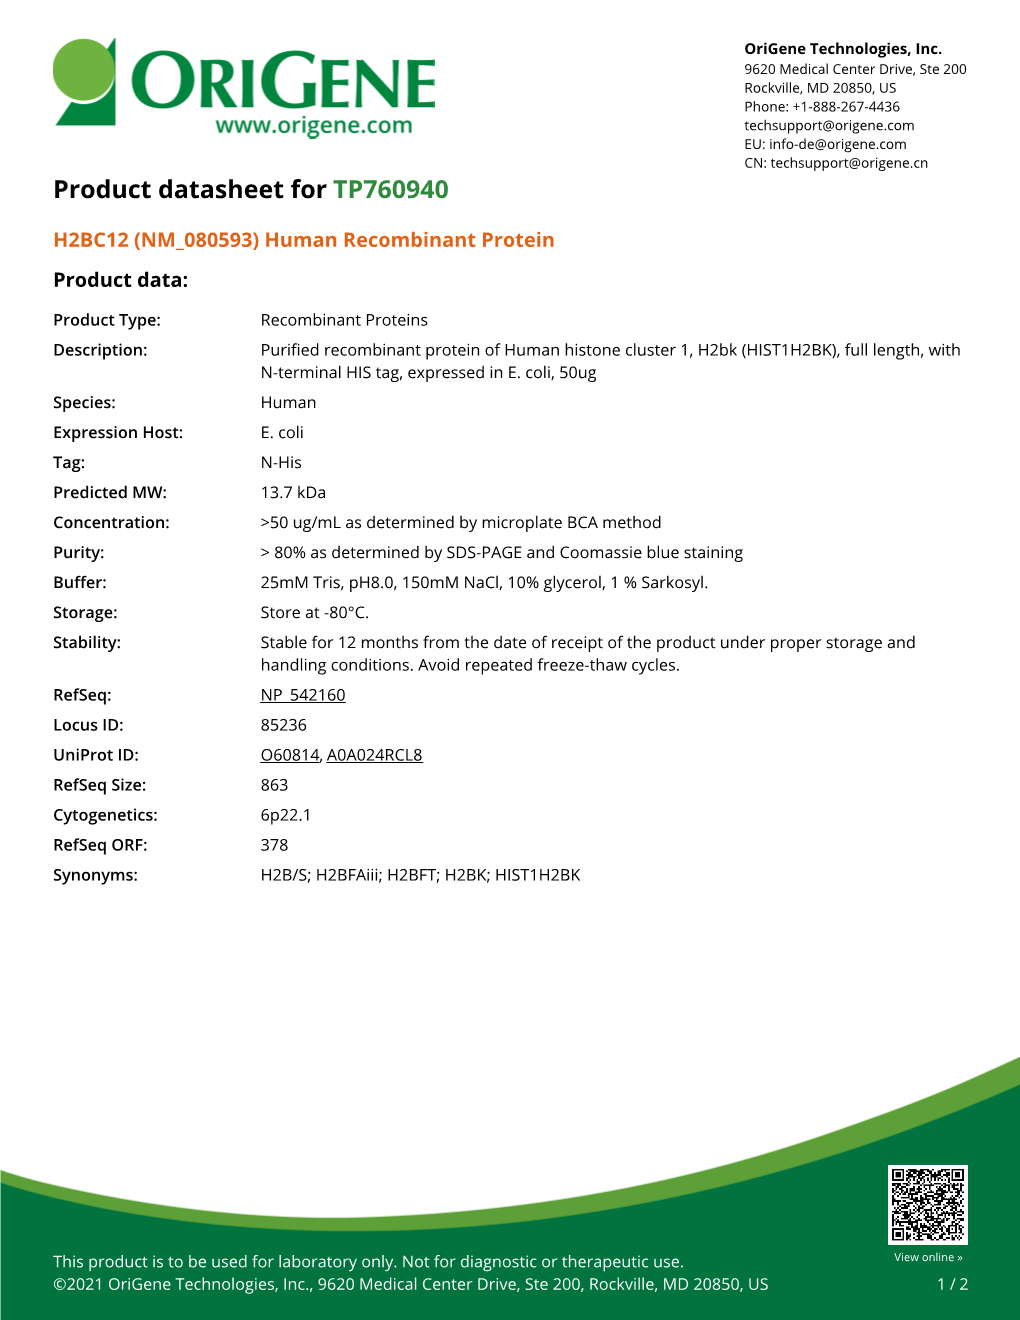 Human Recombinant Protein – TP760940